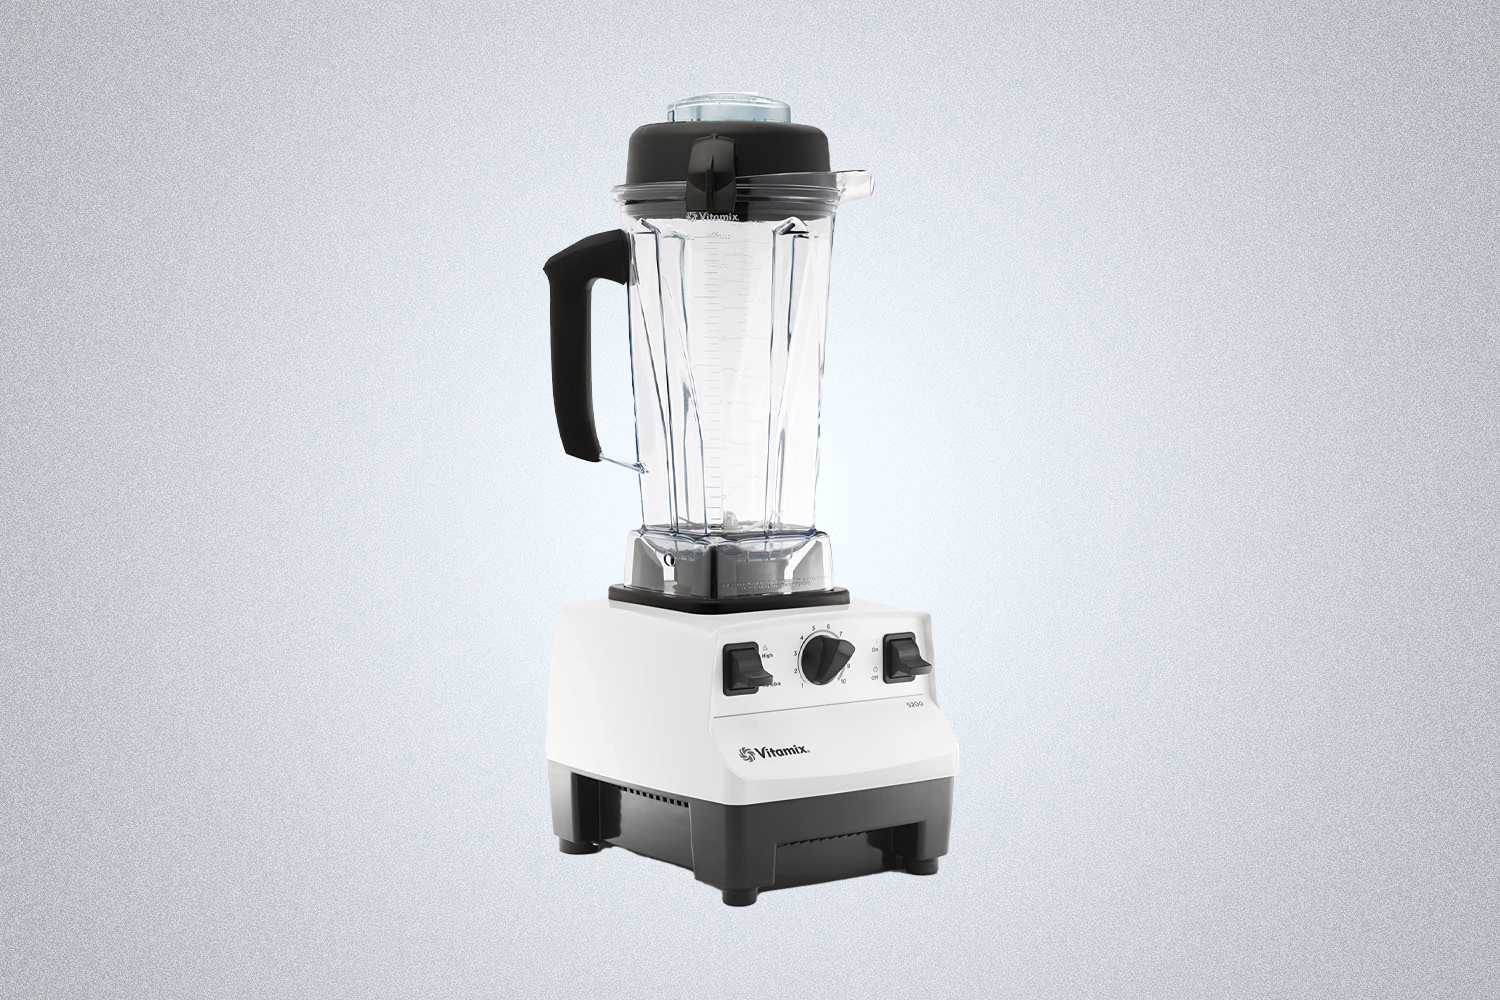 The Vitamix 5200 Standard Blender is a powerful blender for smoothies, protein shakes and other nutritious foods after working out